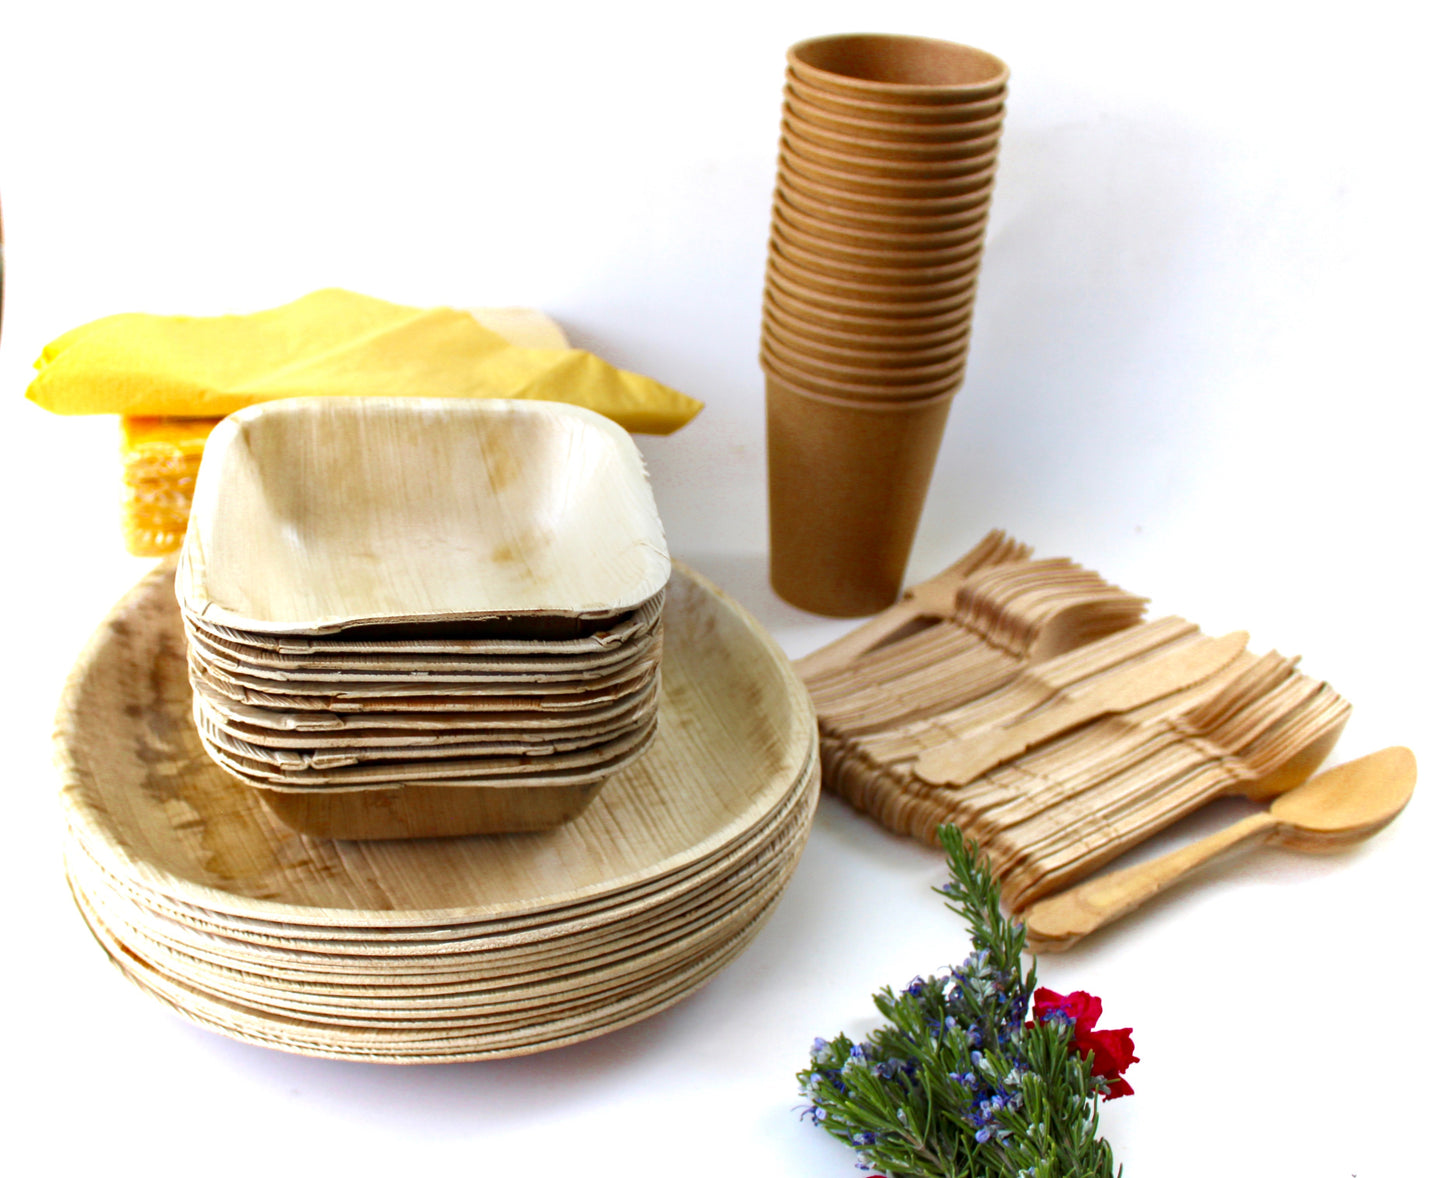 Bamboo Type Palm Leaf 25 Pic 10" Round  - 25 pice  Square deep 6"- 25  pic  cup  - 75 pic Cutlery - 50 Pic Napkin